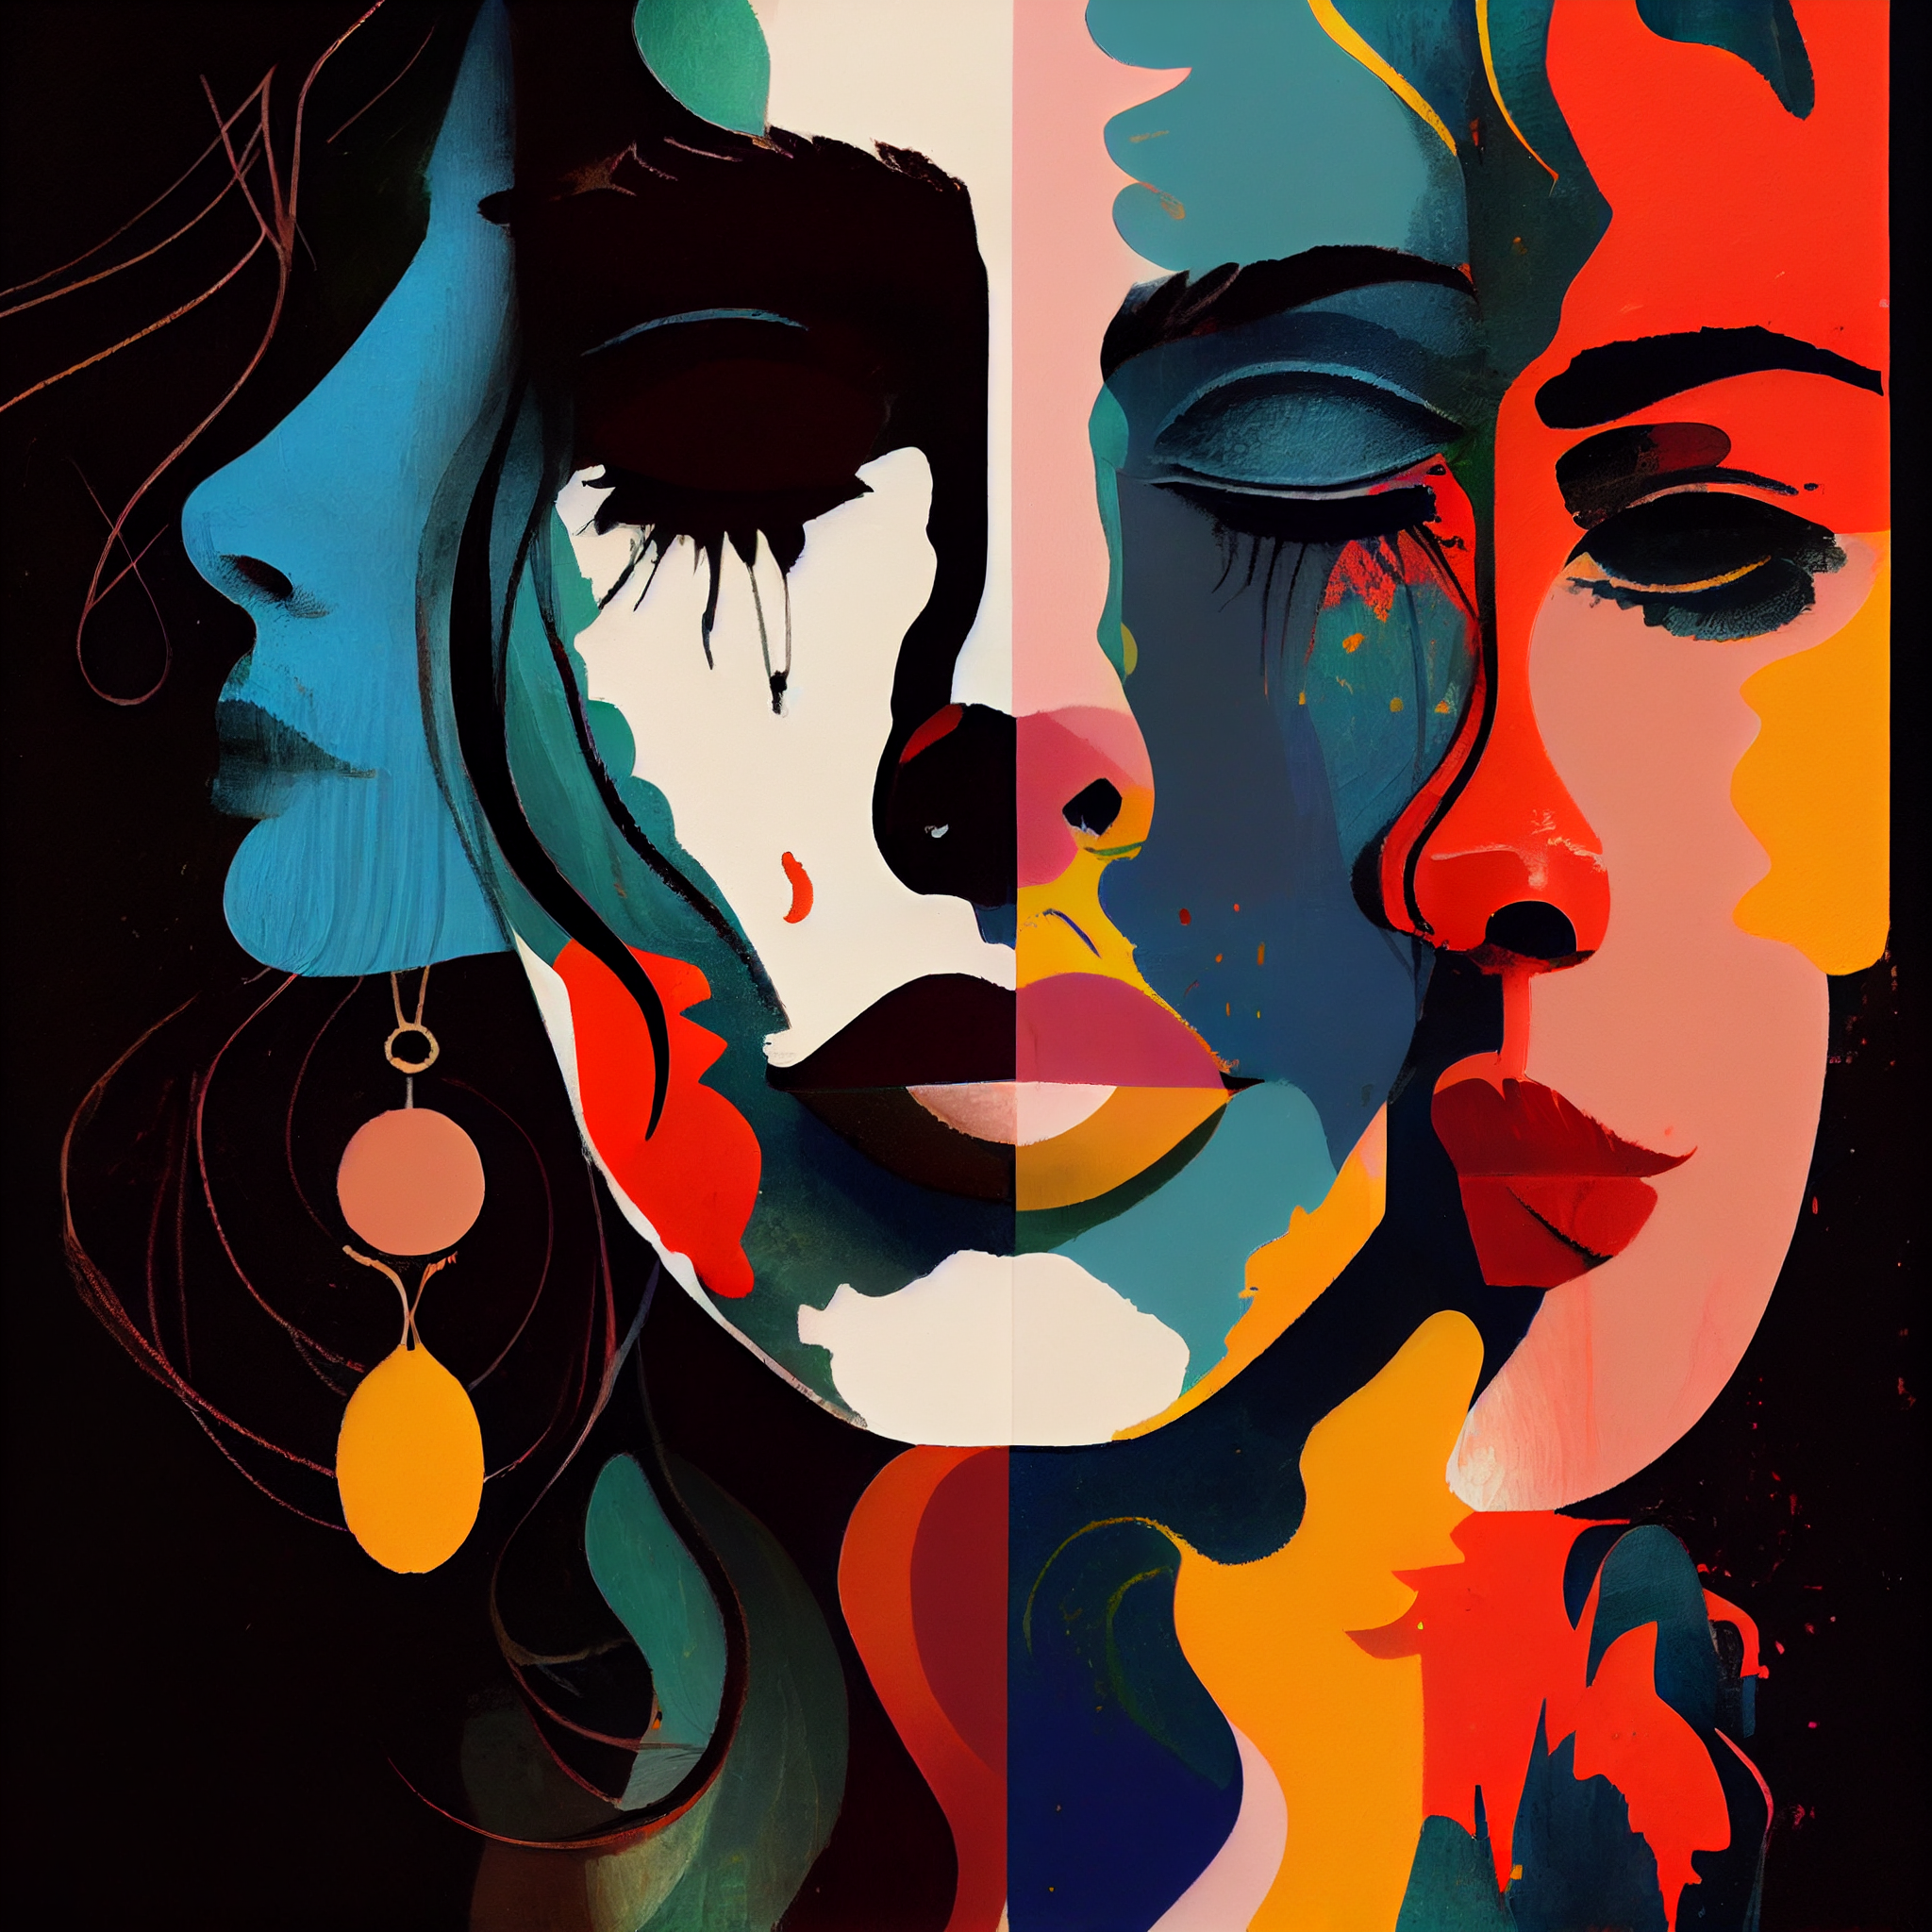 Feminine Fusion: A Vibrant Abstract Acrylic Color Print of Women's Faces